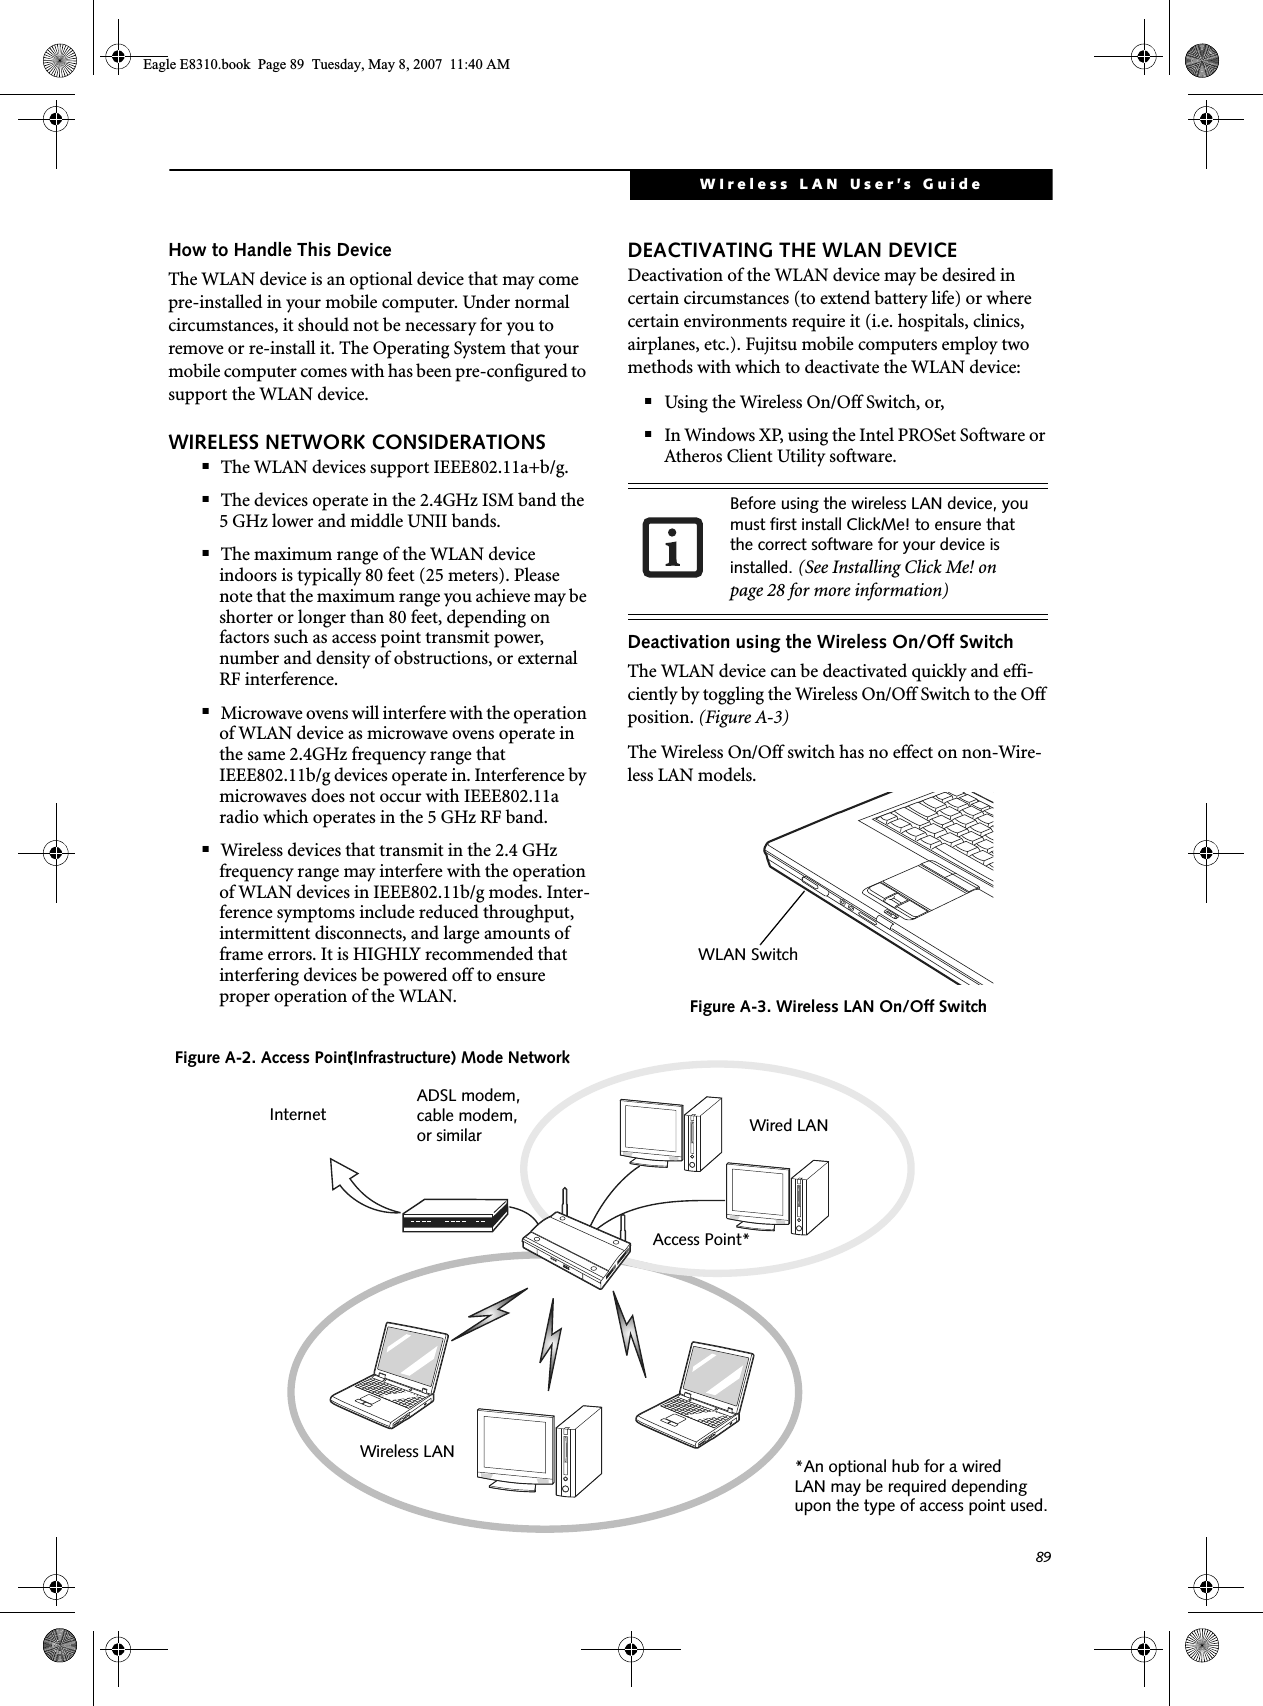 89WIreless LAN User’s Guide How to Handle This DeviceThe WLAN device is an optional device that may come pre-installed in your mobile computer. Under normal circumstances, it should not be necessary for you to remove or re-install it. The Operating System that your mobile computer comes with has been pre-configured to support the WLAN device.WIRELESS NETWORK CONSIDERATIONS■The WLAN devices support IEEE802.11a+b/g.■The devices operate in the 2.4GHz ISM band the 5 GHz lower and middle UNII bands.■The maximum range of the WLAN device indoors is typically 80 feet (25 meters). Please note that the maximum range you achieve may be shorter or longer than 80 feet, depending on factors such as access point transmit power, number and density of obstructions, or external RF interference.■Microwave ovens will interfere with the operation of WLAN device as microwave ovens operate in the same 2.4GHz frequency range that IEEE802.11b/g devices operate in. Interference by microwaves does not occur with IEEE802.11a radio which operates in the 5 GHz RF band.■Wireless devices that transmit in the 2.4 GHz frequency range may interfere with the operation of WLAN devices in IEEE802.11b/g modes. Inter-ference symptoms include reduced throughput, intermittent disconnects, and large amounts of frame errors. It is HIGHLY recommended that interfering devices be powered off to ensure proper operation of the WLAN.DEACTIVATING THE WLAN DEVICEDeactivation of the WLAN device may be desired in certain circumstances (to extend battery life) or where certain environments require it (i.e. hospitals, clinics, airplanes, etc.). Fujitsu mobile computers employ two methods with which to deactivate the WLAN device:■Using the Wireless On/Off Switch, or,■In Windows XP, using the Intel PROSet Software or Atheros Client Utility software.Deactivation using the Wireless On/Off SwitchThe WLAN device can be deactivated quickly and effi-ciently by toggling the Wireless On/Off Switch to the Off position. (Figure A-3)The Wireless On/Off switch has no effect on non-Wire-less LAN models.Figure A-3. Wireless LAN On/Off SwitchBefore using the wireless LAN device, you must first install ClickMe! to ensure that the correct software for your device is installed. (See Installing Click Me! on page 28 for more information)WLAN SwitchFigure A-2. Access Point ADSL modem,cable modem,or similarInternet Wired LANAccess Point*Wireless LAN *An optional hub for a wiredLAN may be required dependingupon the type of access point used.       (Infrastructure) Mode NetworkEagle E8310.book  Page 89  Tuesday, May 8, 2007  11:40 AM